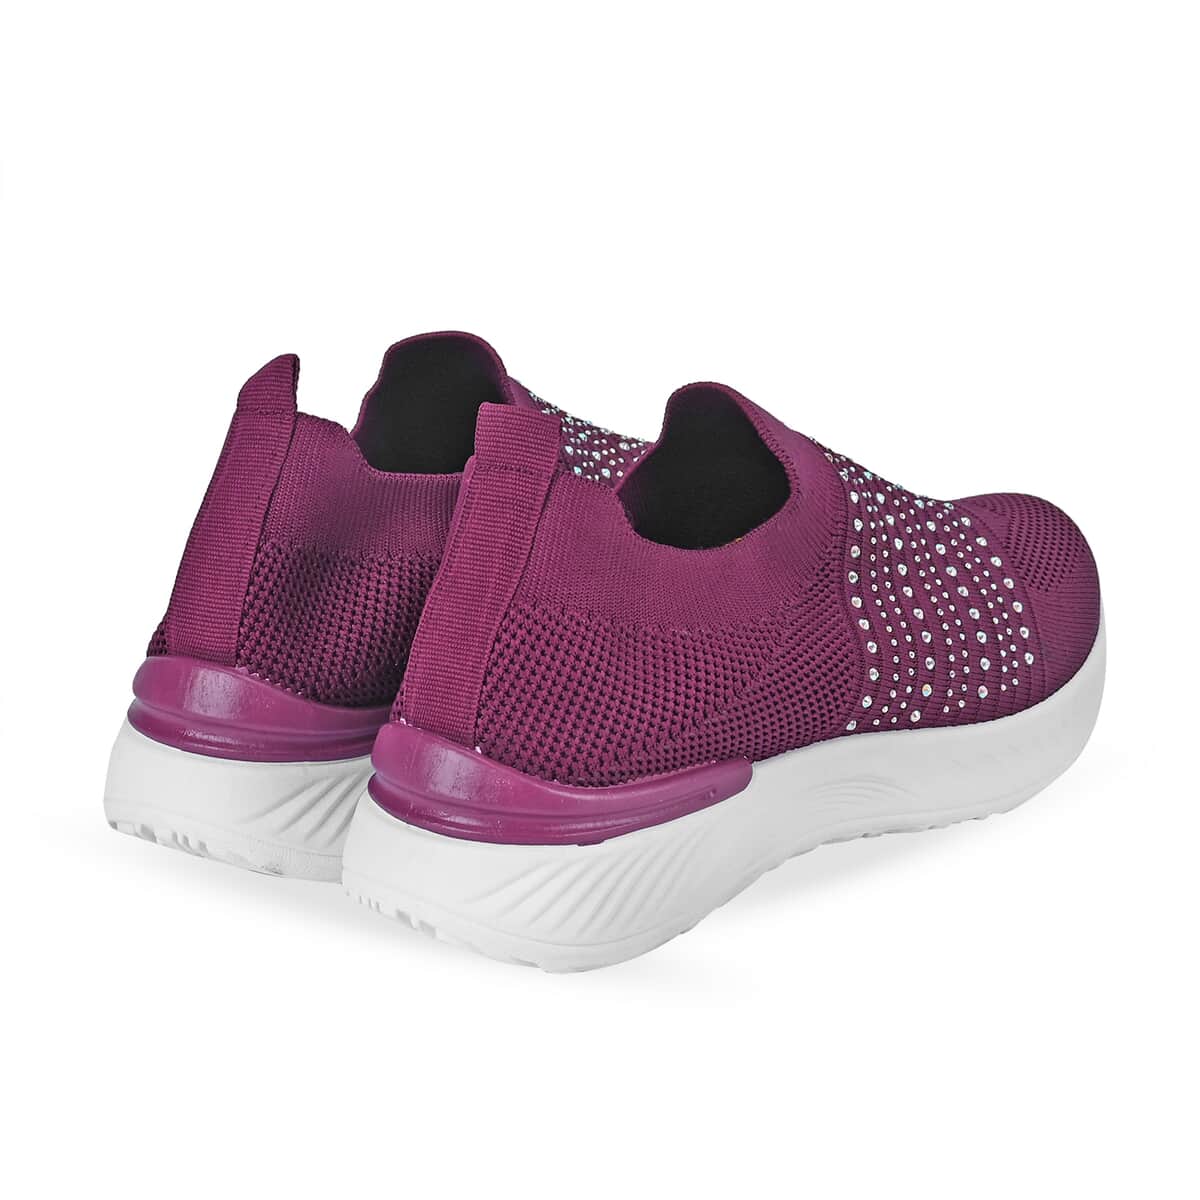 Purple Women's Crystal Jeweled Knit Vented Trainers - (Size 7-7.5) image number 1